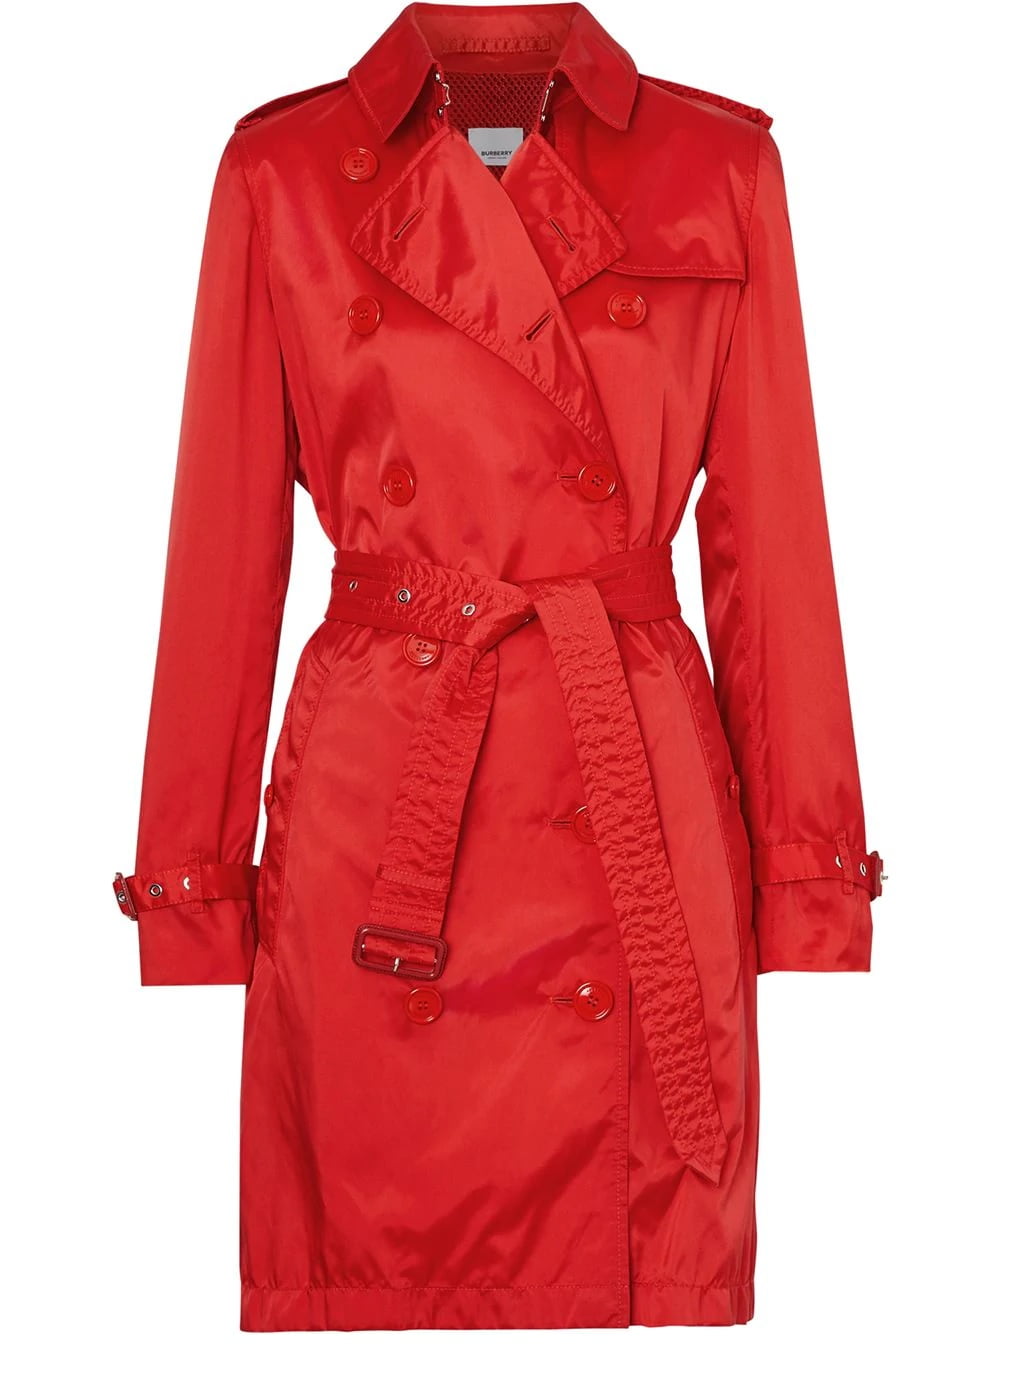 Burberry Ladies Red Double Breasted Trench Coat With Detachable Hood, Brand Size 4 (US Size 2) - Walmart.com